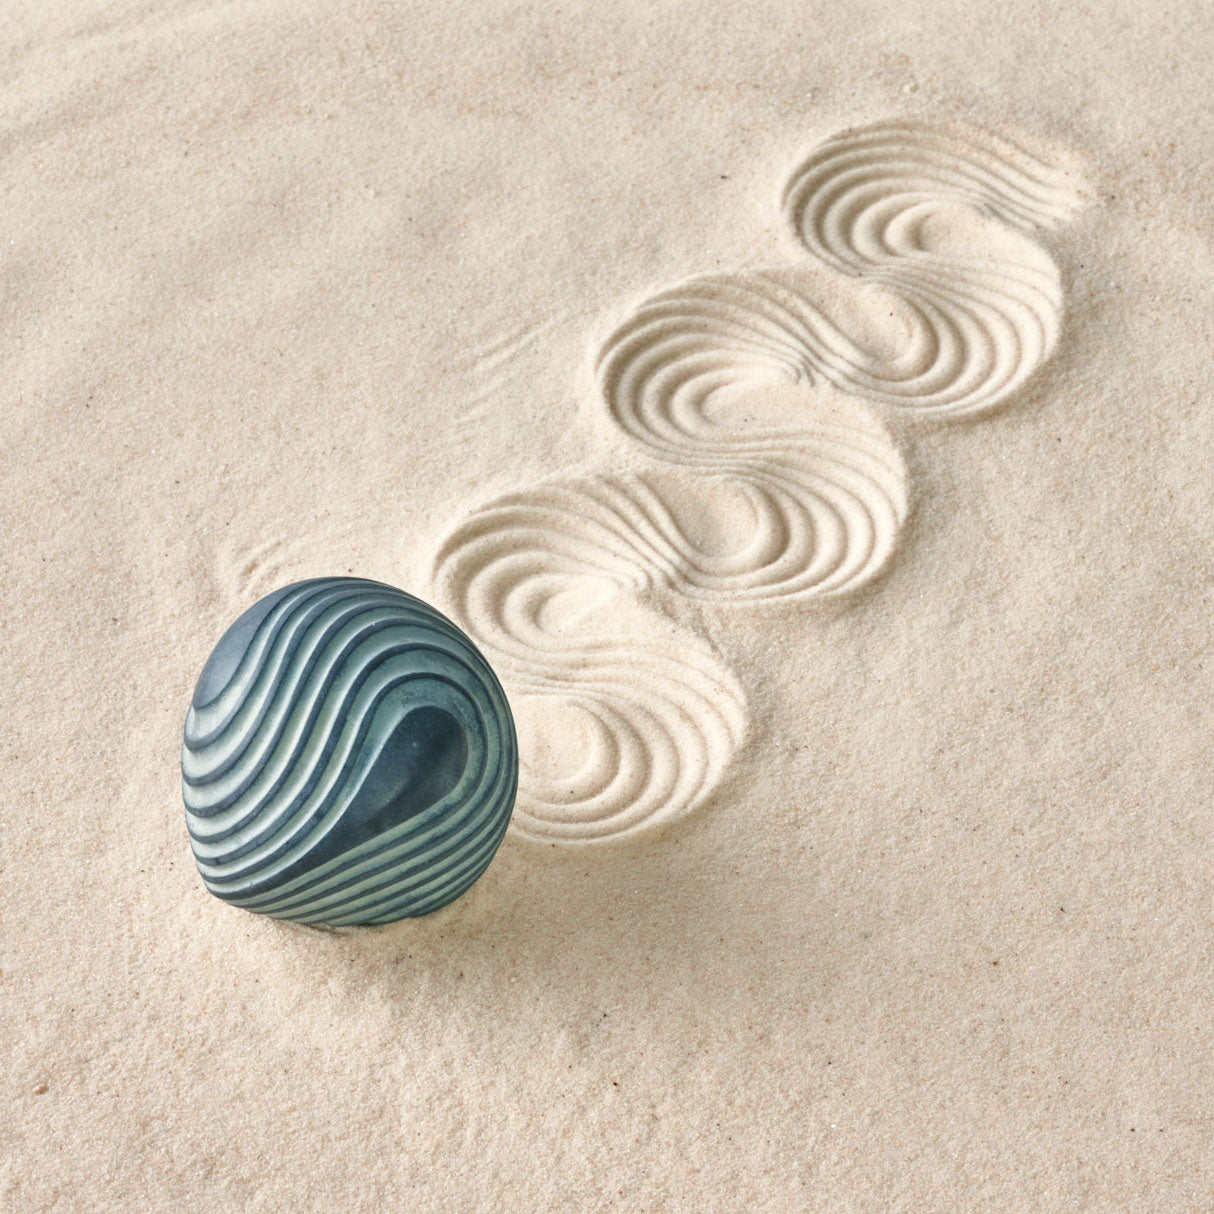 artistic tool for sand play